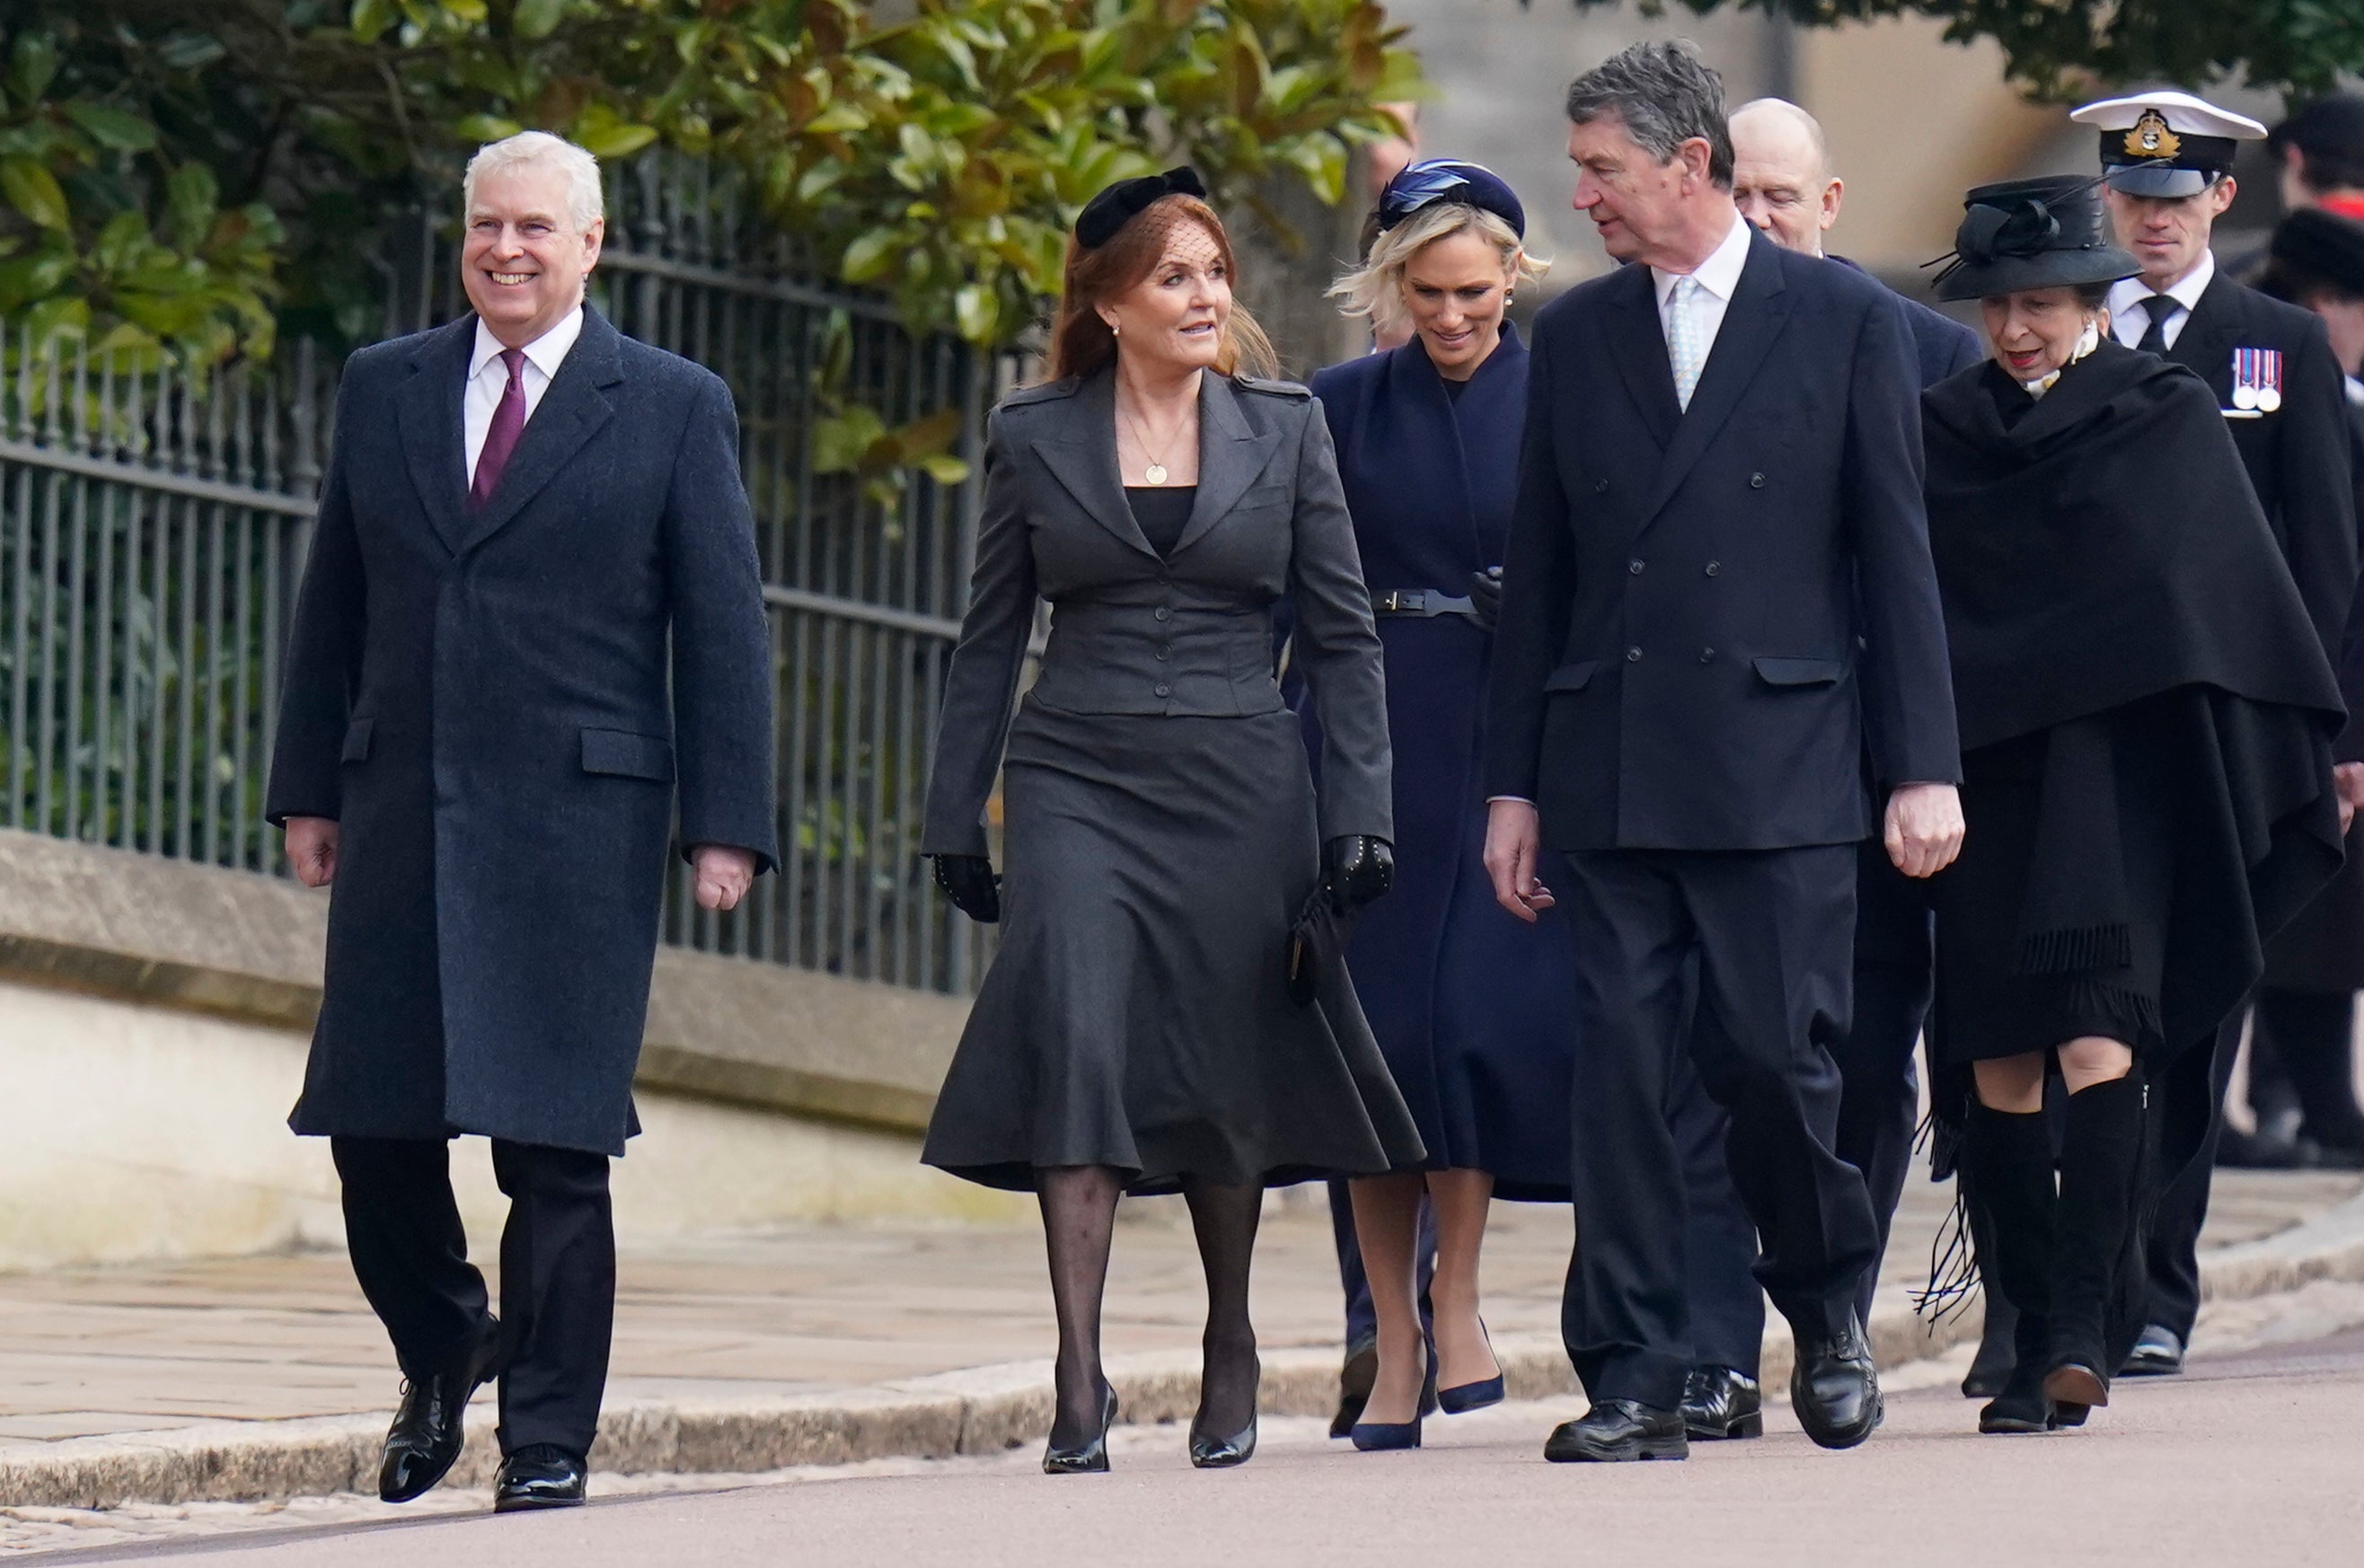 Prince Andrew (left) leads the line alongside Sarah, Duchess of York, Zara Tindall, Sir Timothy Laurence, Mike Tindall and Anne, Princess Royal at a memorial service for the late King Constantine of Greece